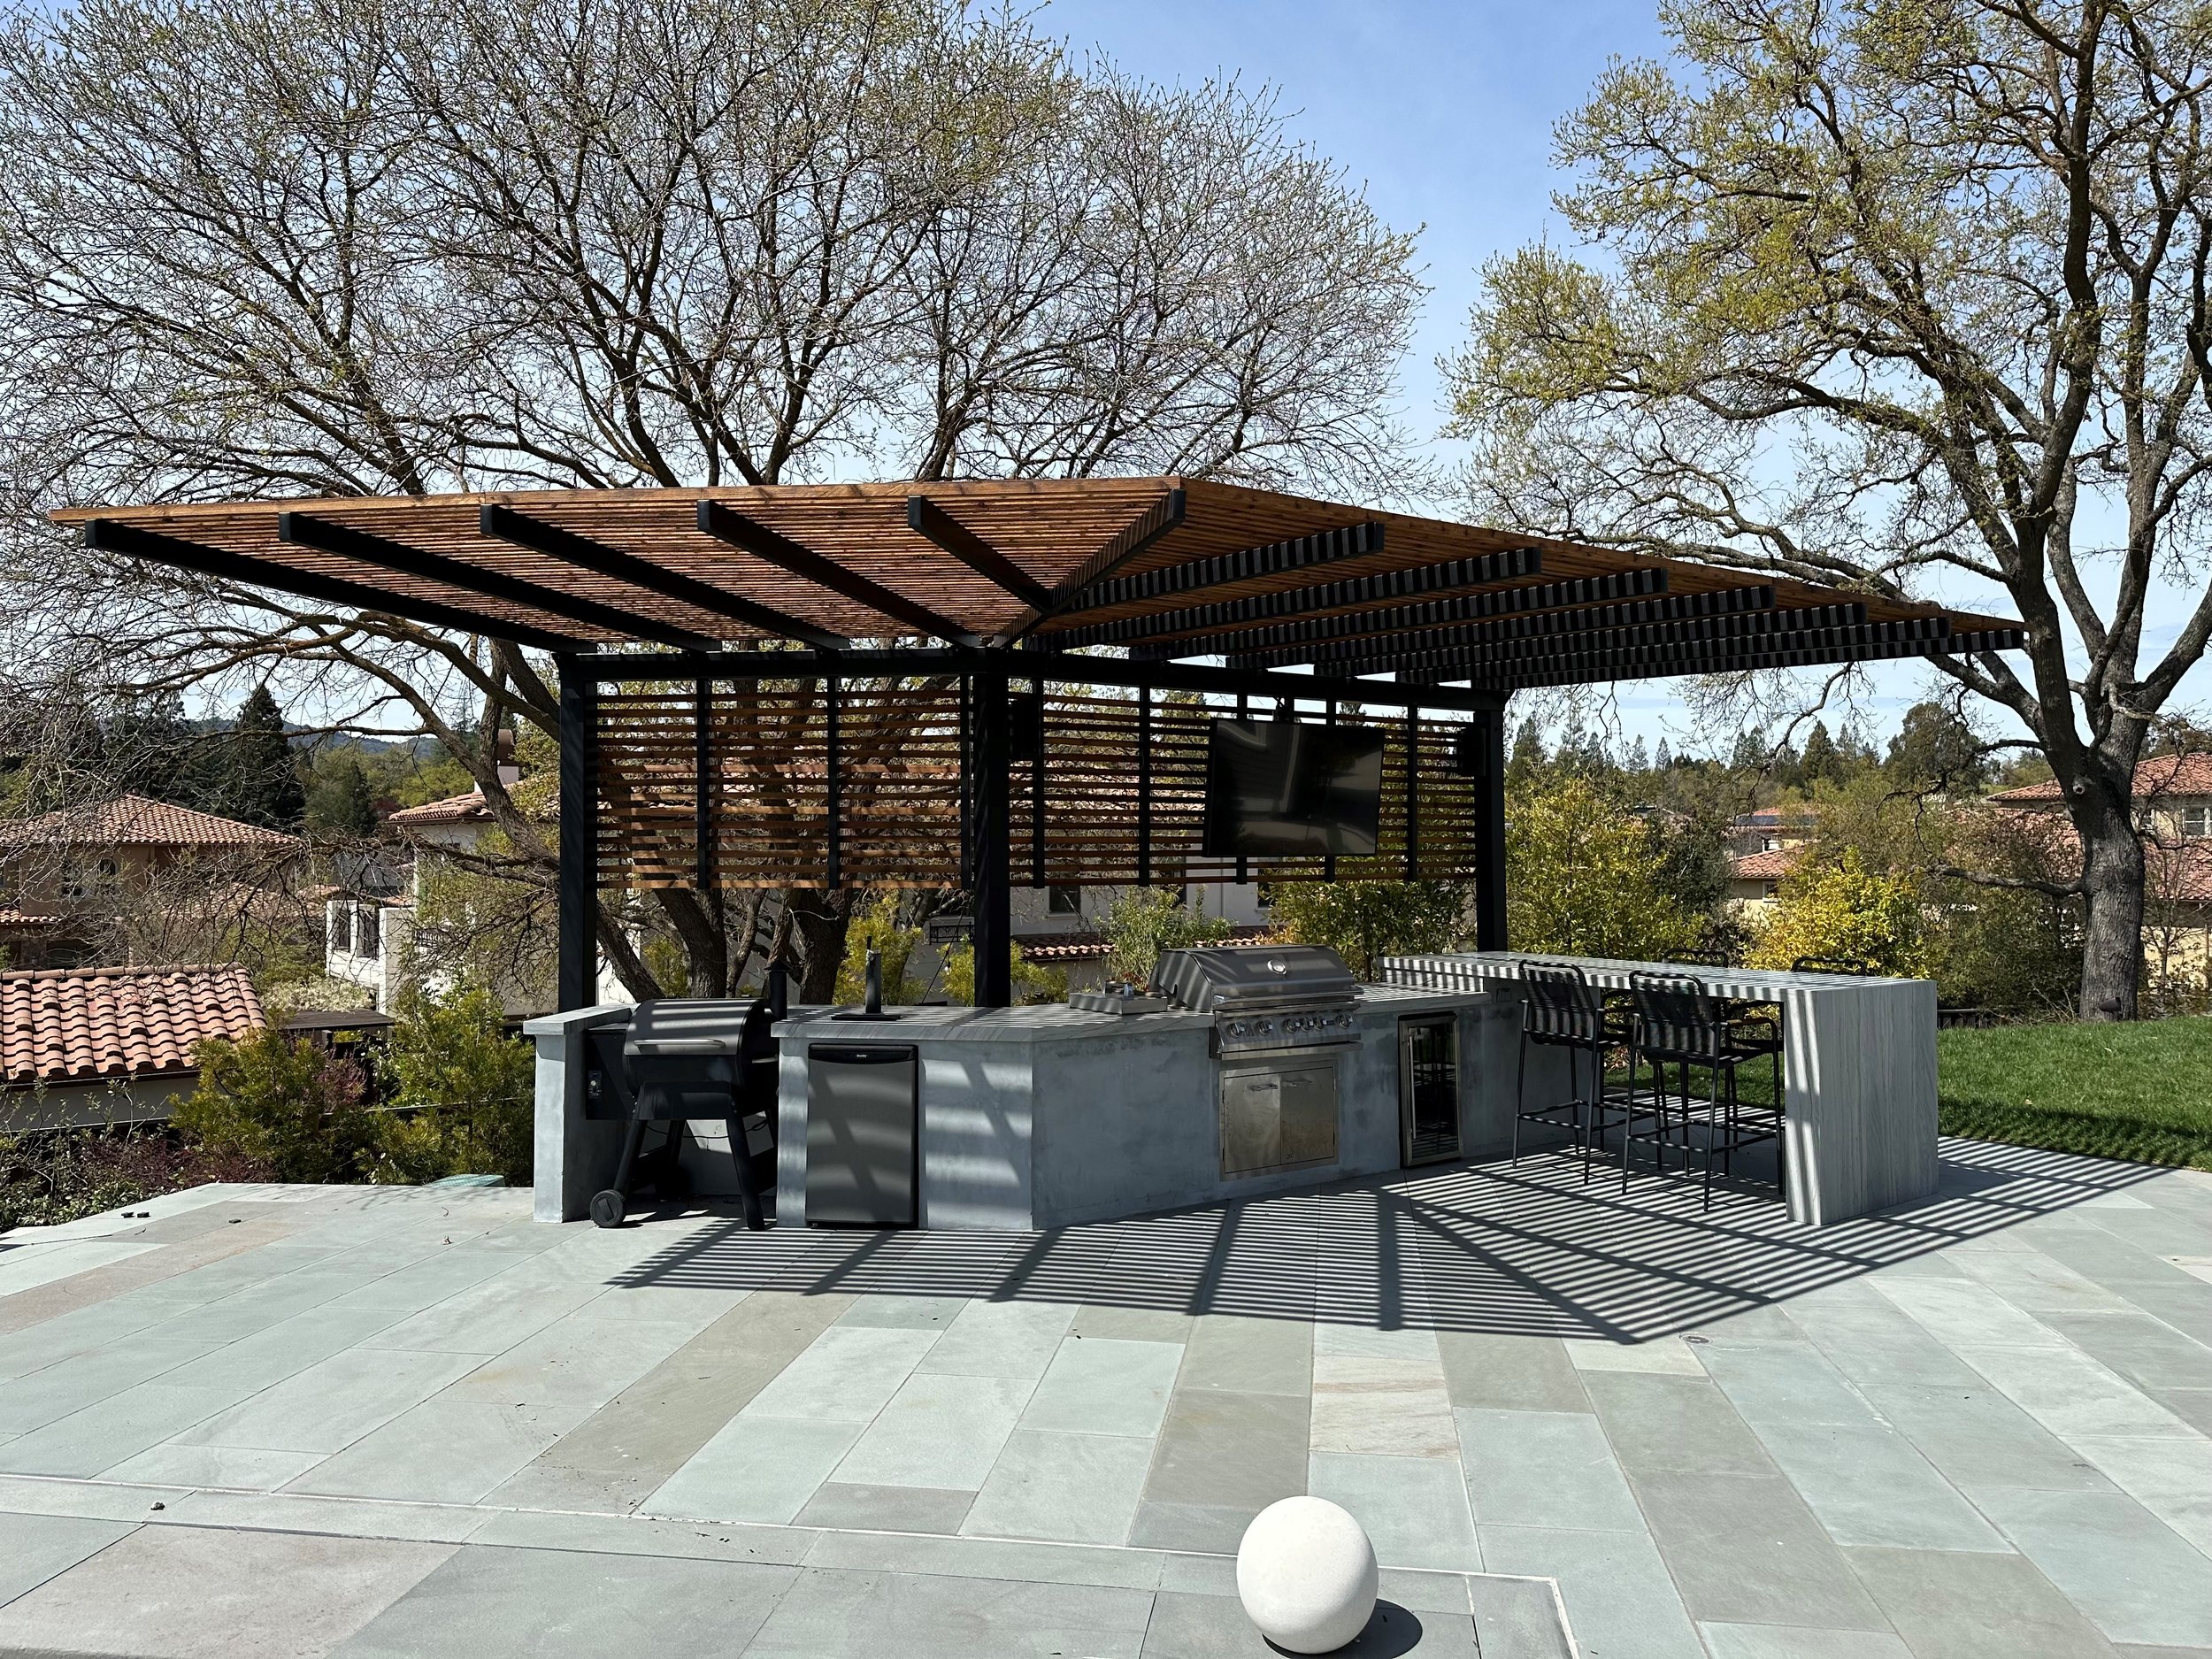 Stunning Outdoor Patio Cover and Pergolas Image Gallery